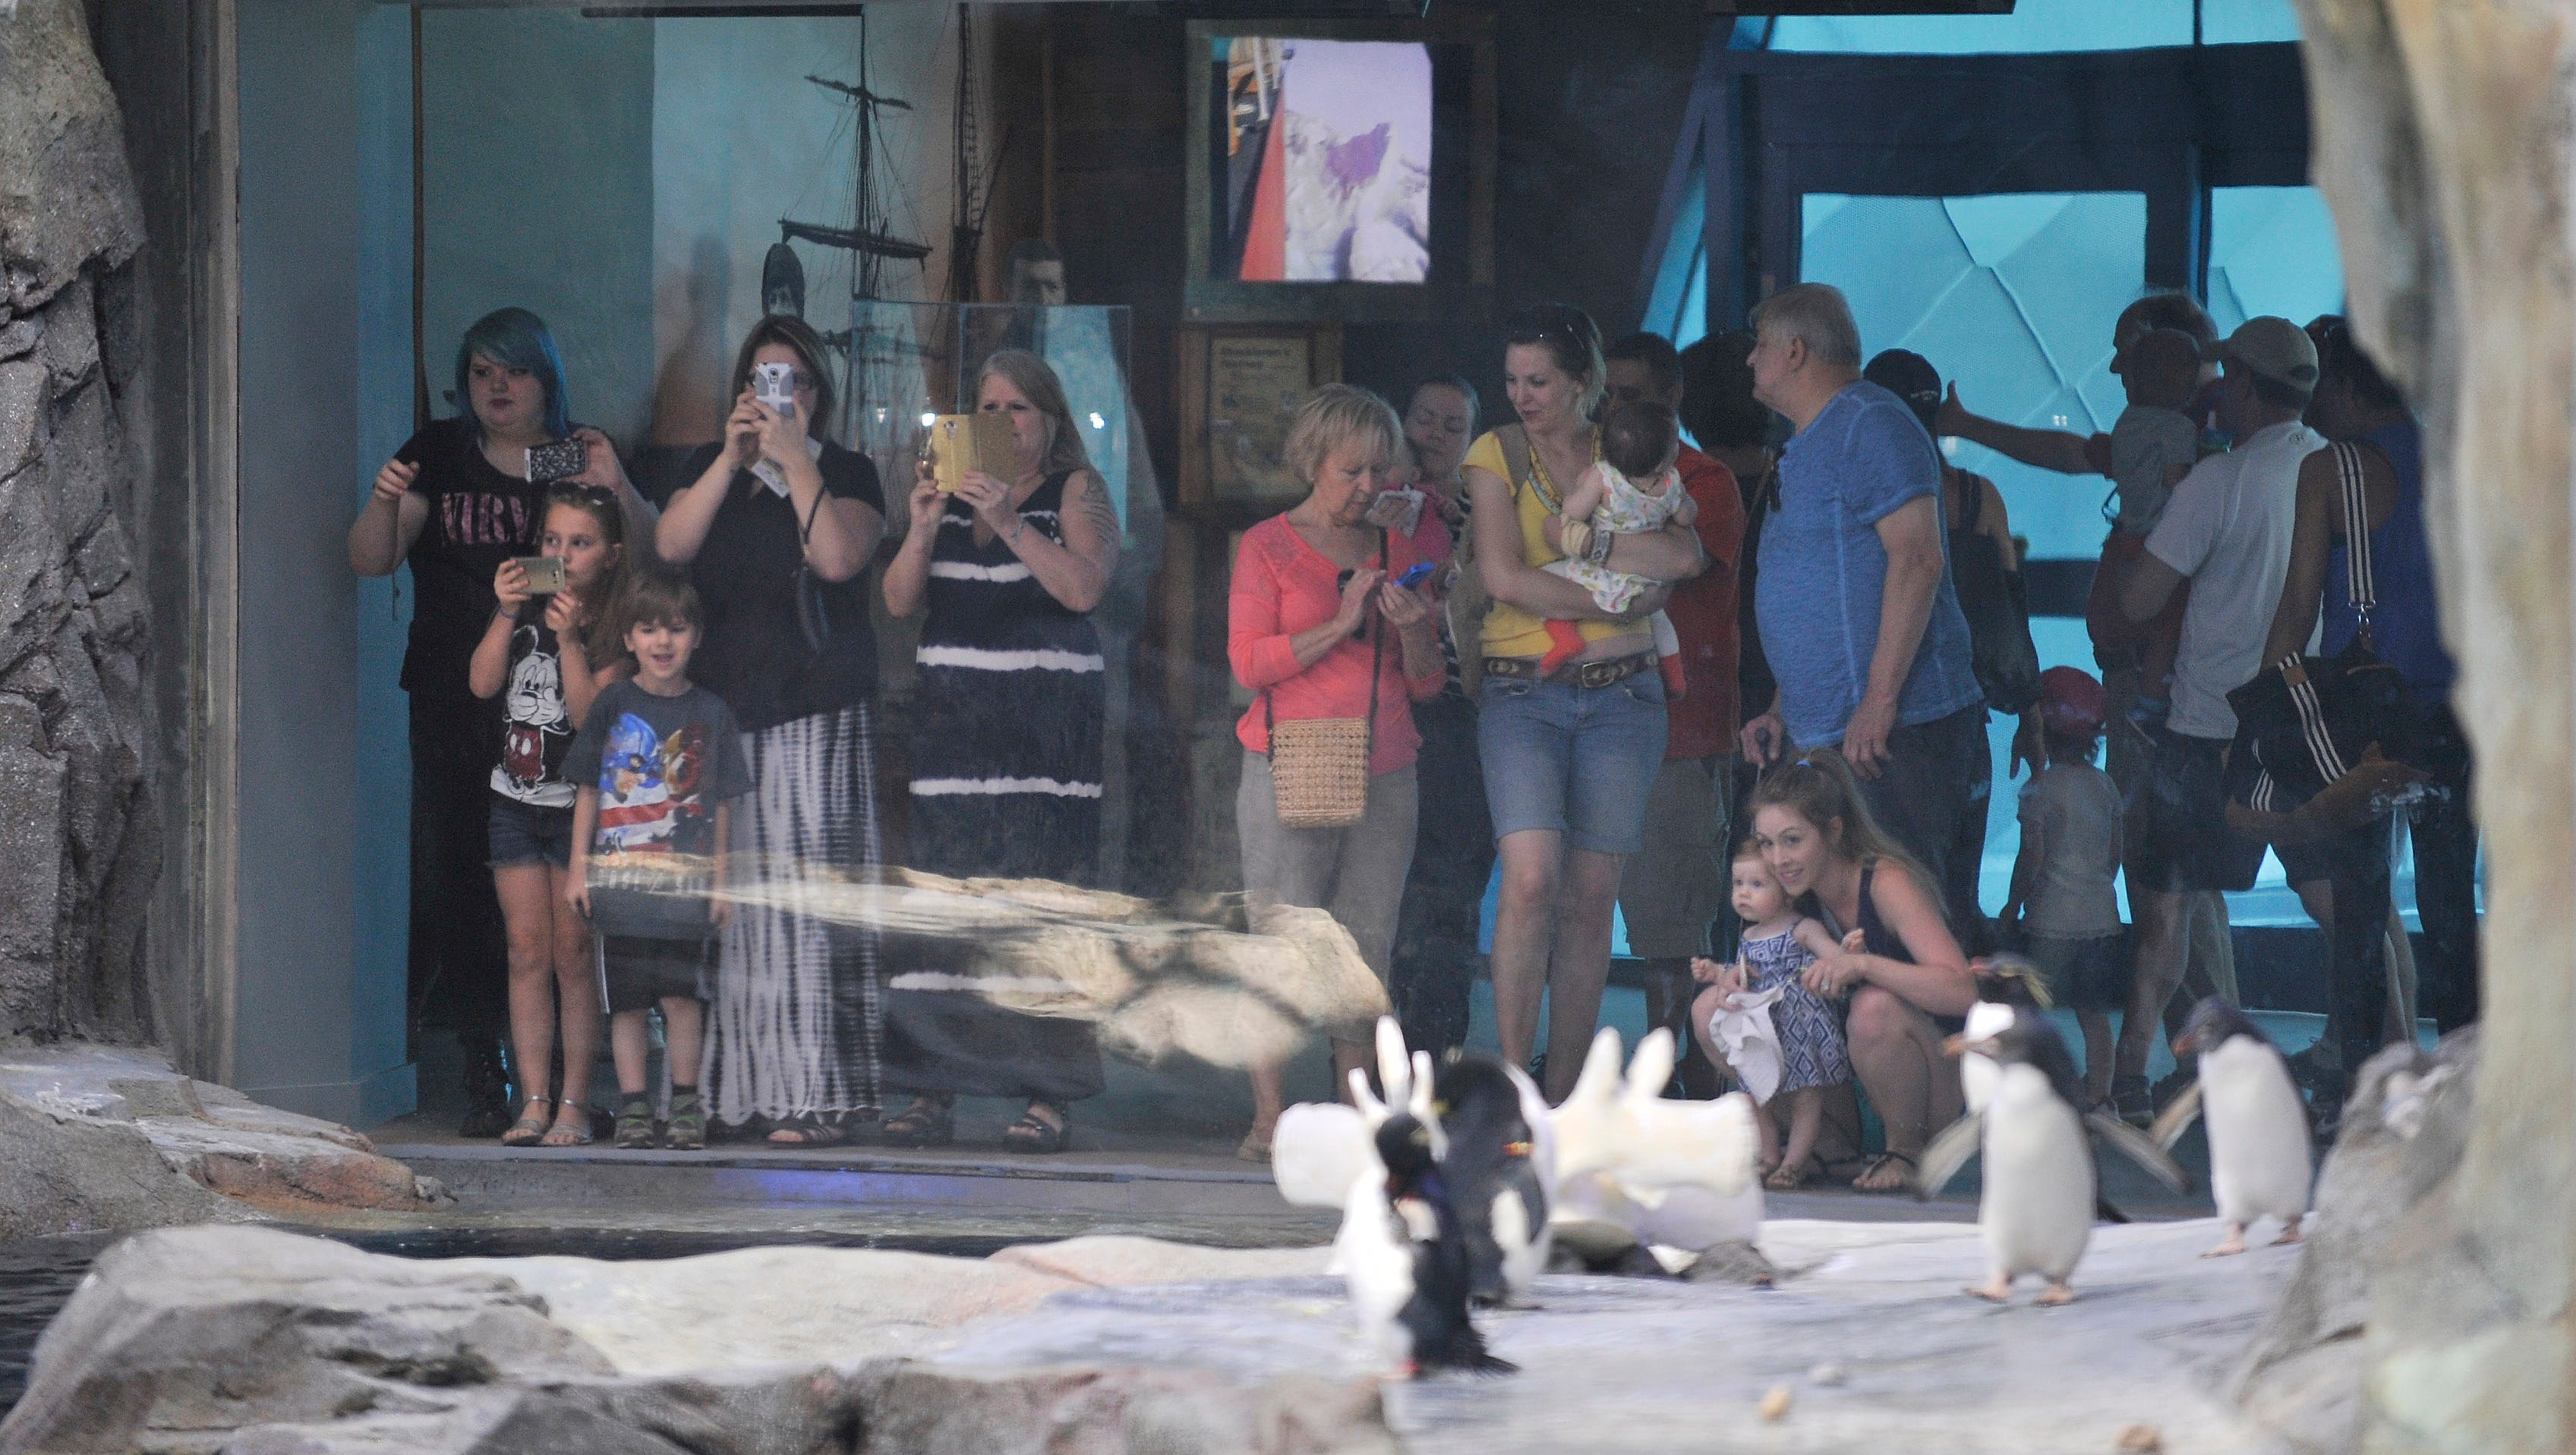 Visitors look at the penguins at the Polk Penguin Conservation Center.